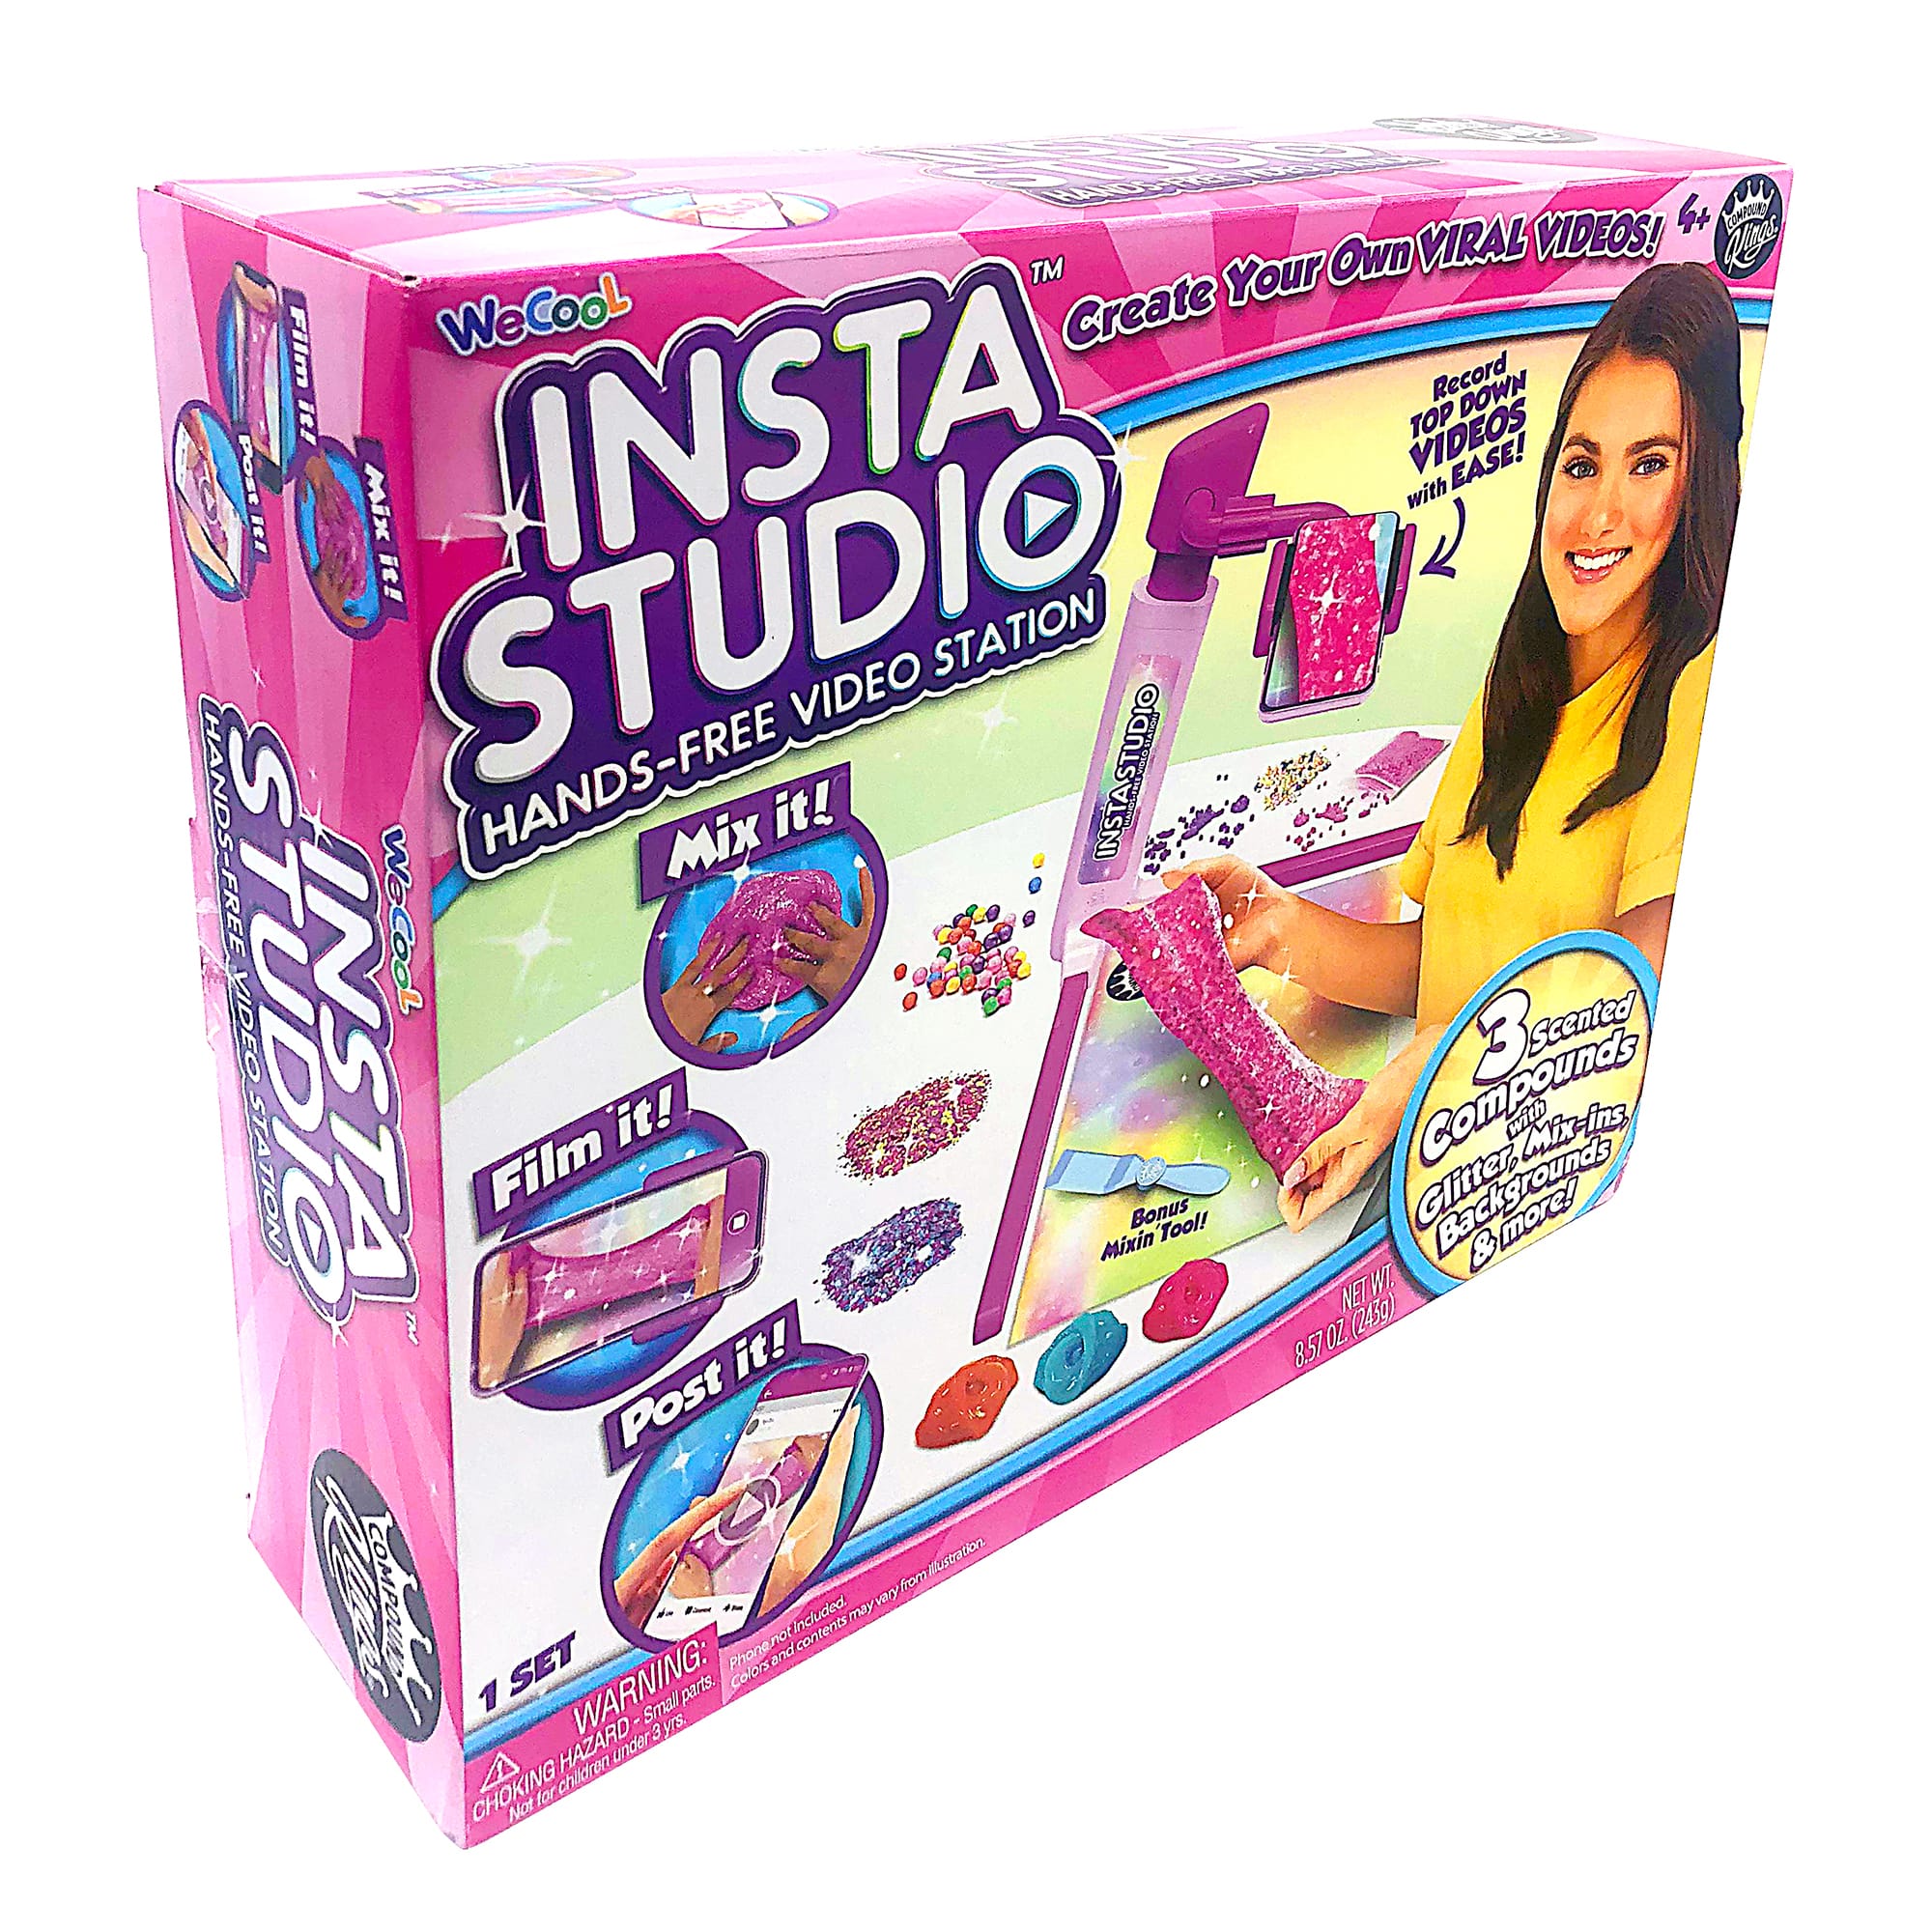 Insta Studio Hands-free Video Station Record Videos NEW Gift For